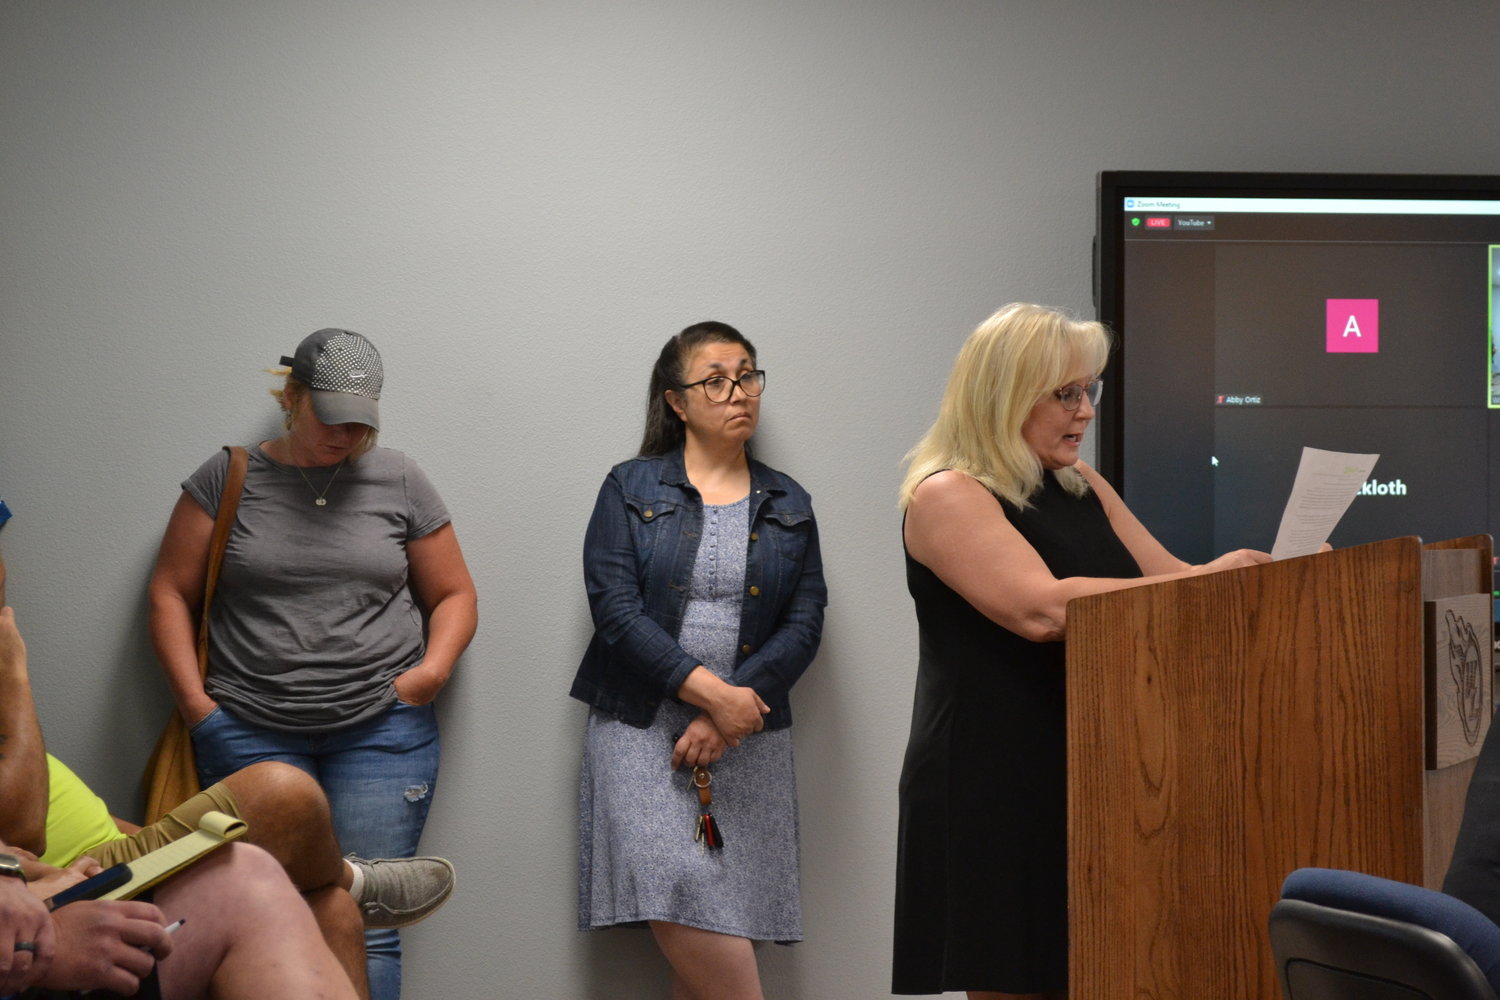 Lisa Behnke, a member of the West Liberty Advocacy Group for Public Education, read a statement to the board of education Monday, July 18, during the meeting about material the group found to be pornographic and obscene available in the school district's libraries.